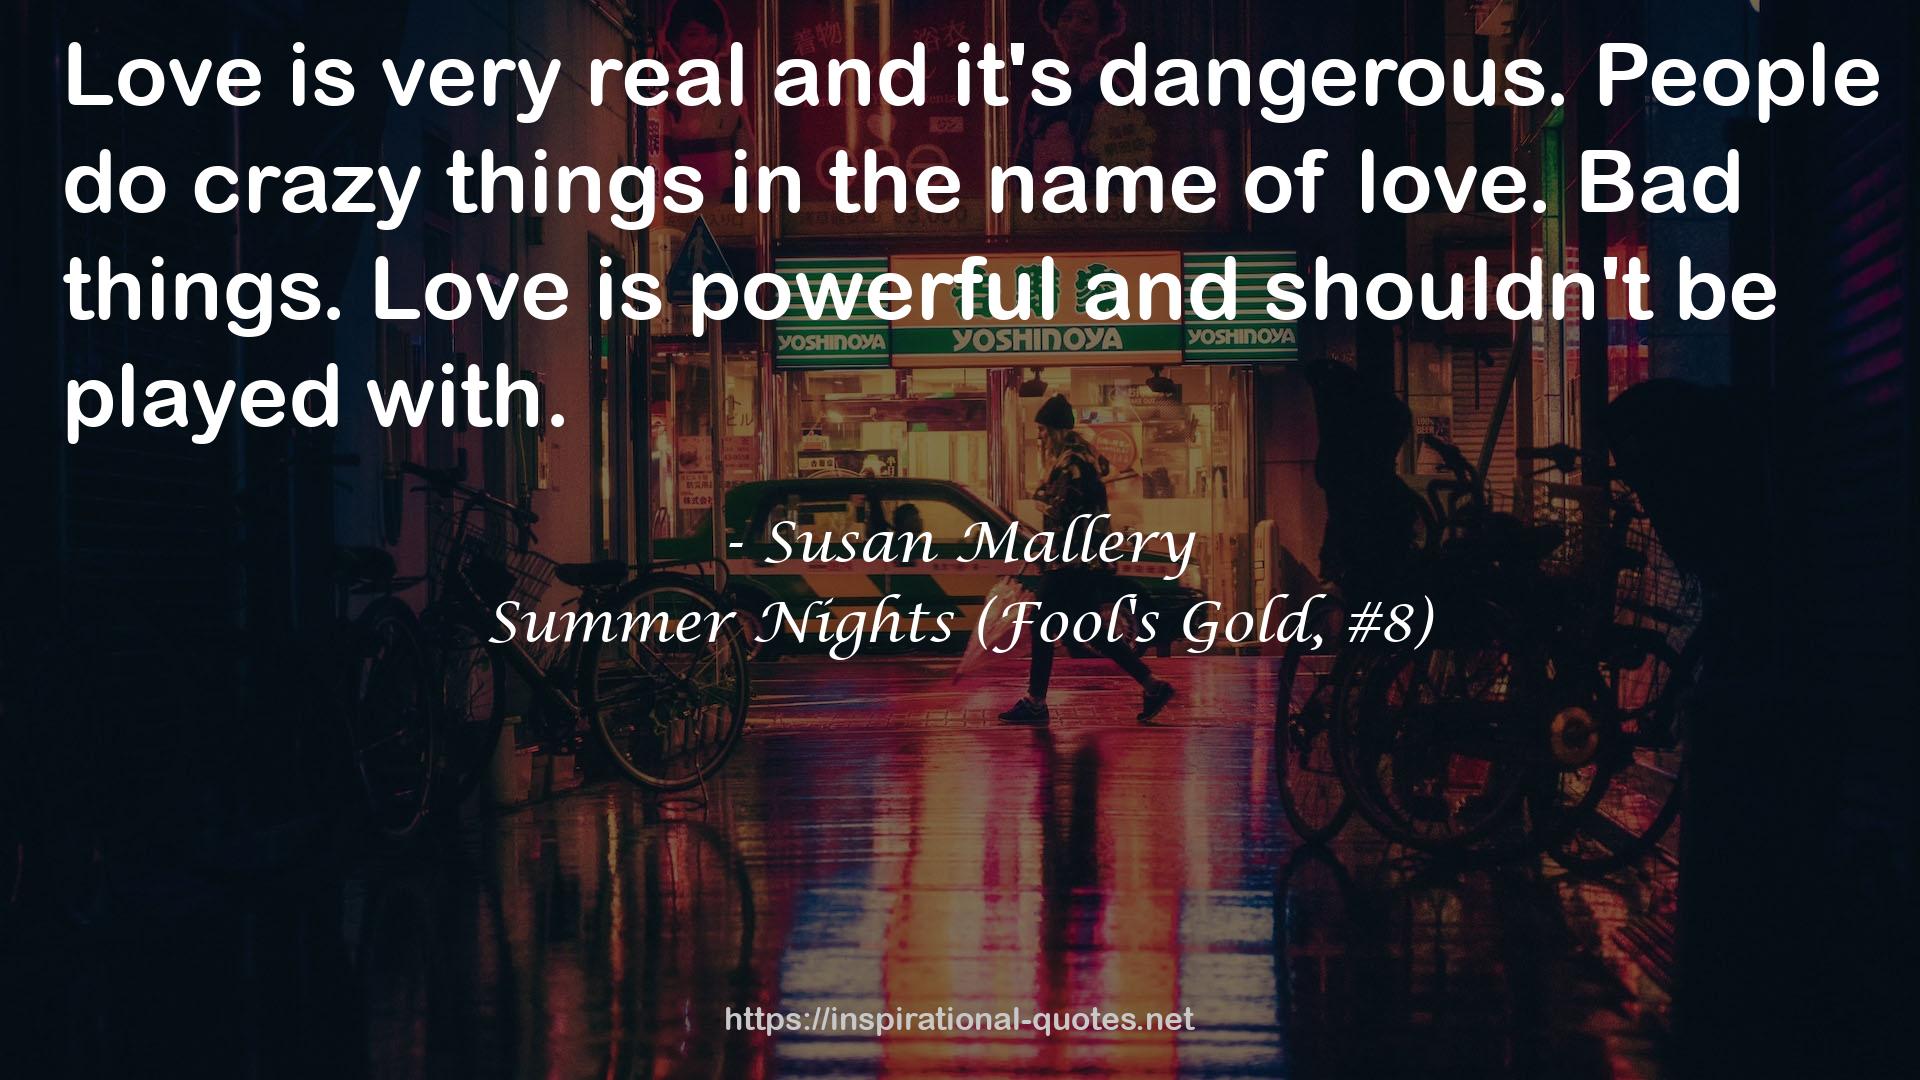 Summer Nights (Fool's Gold, #8) QUOTES